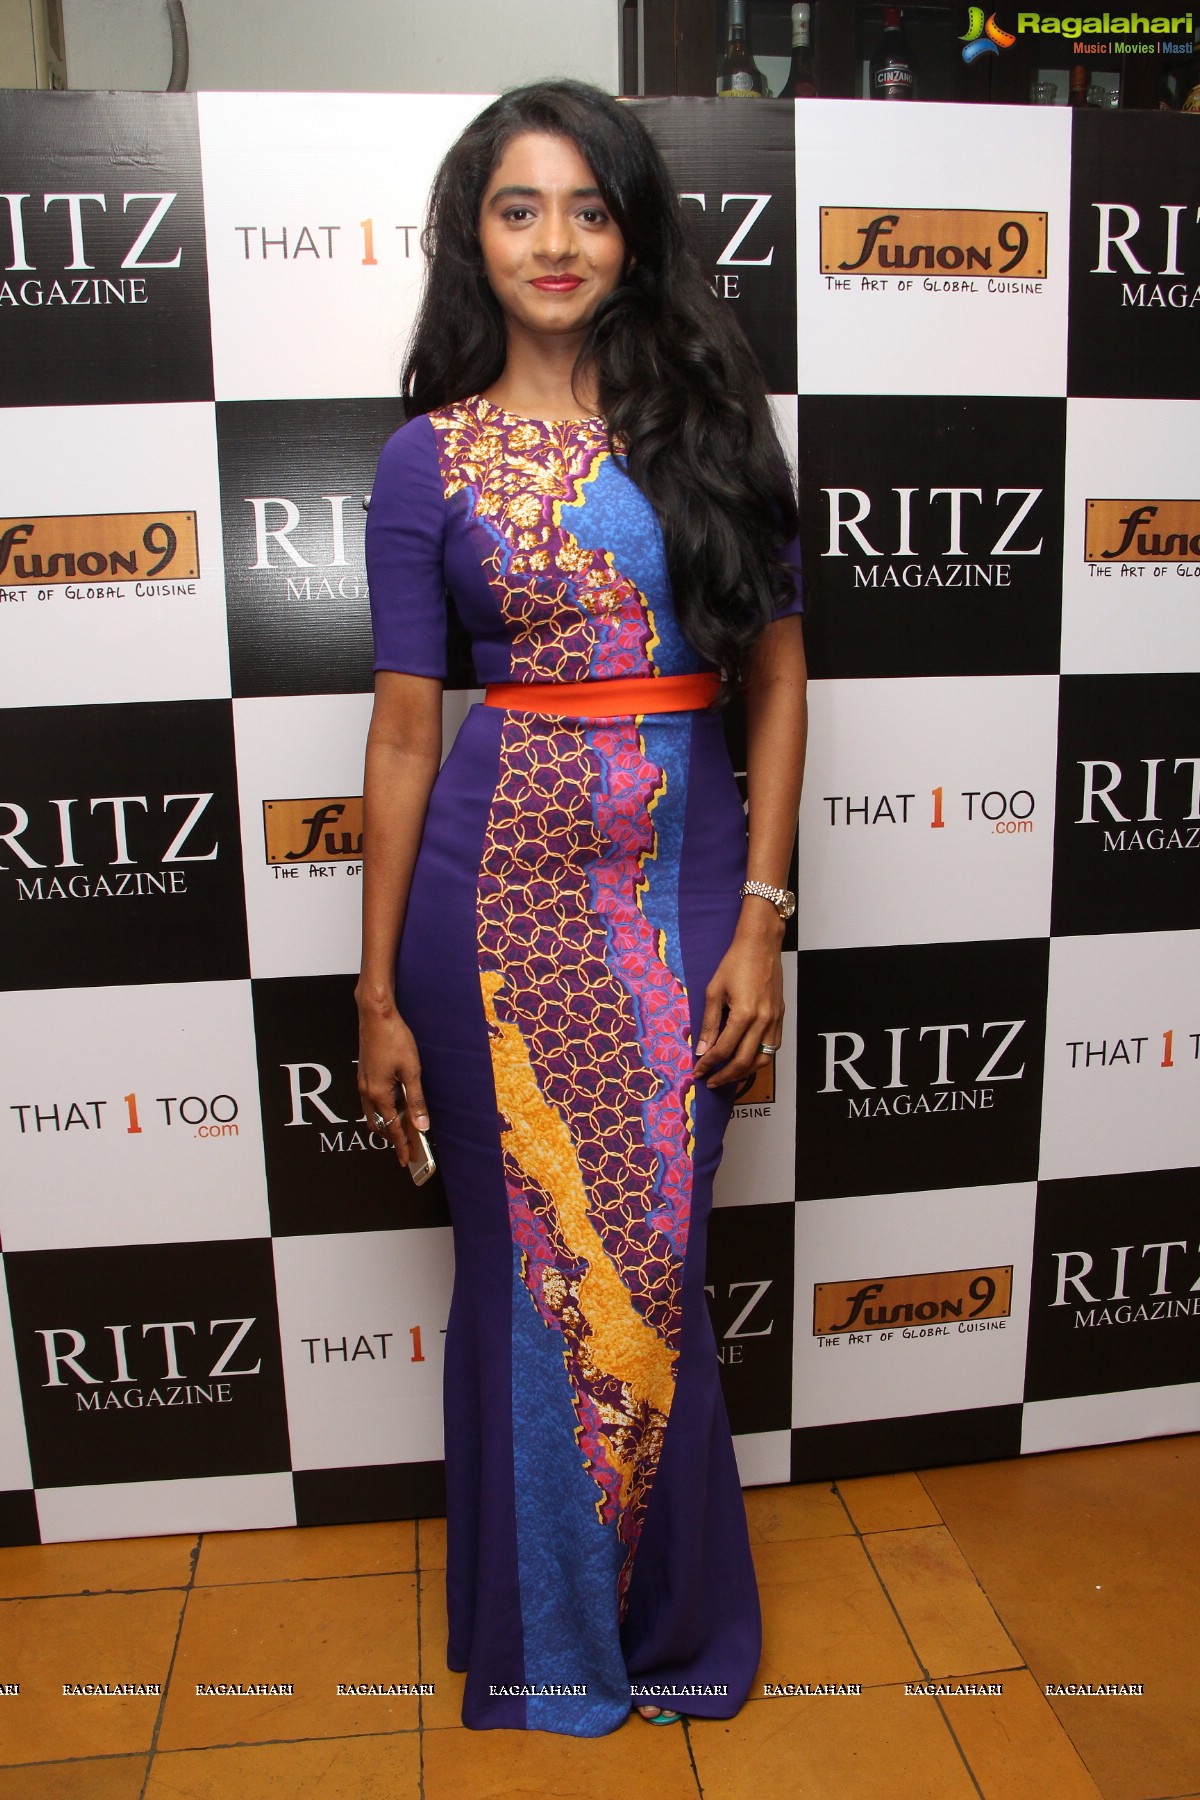 Ritz Cover Launch Party of July 2016 Edition at Fusion 9